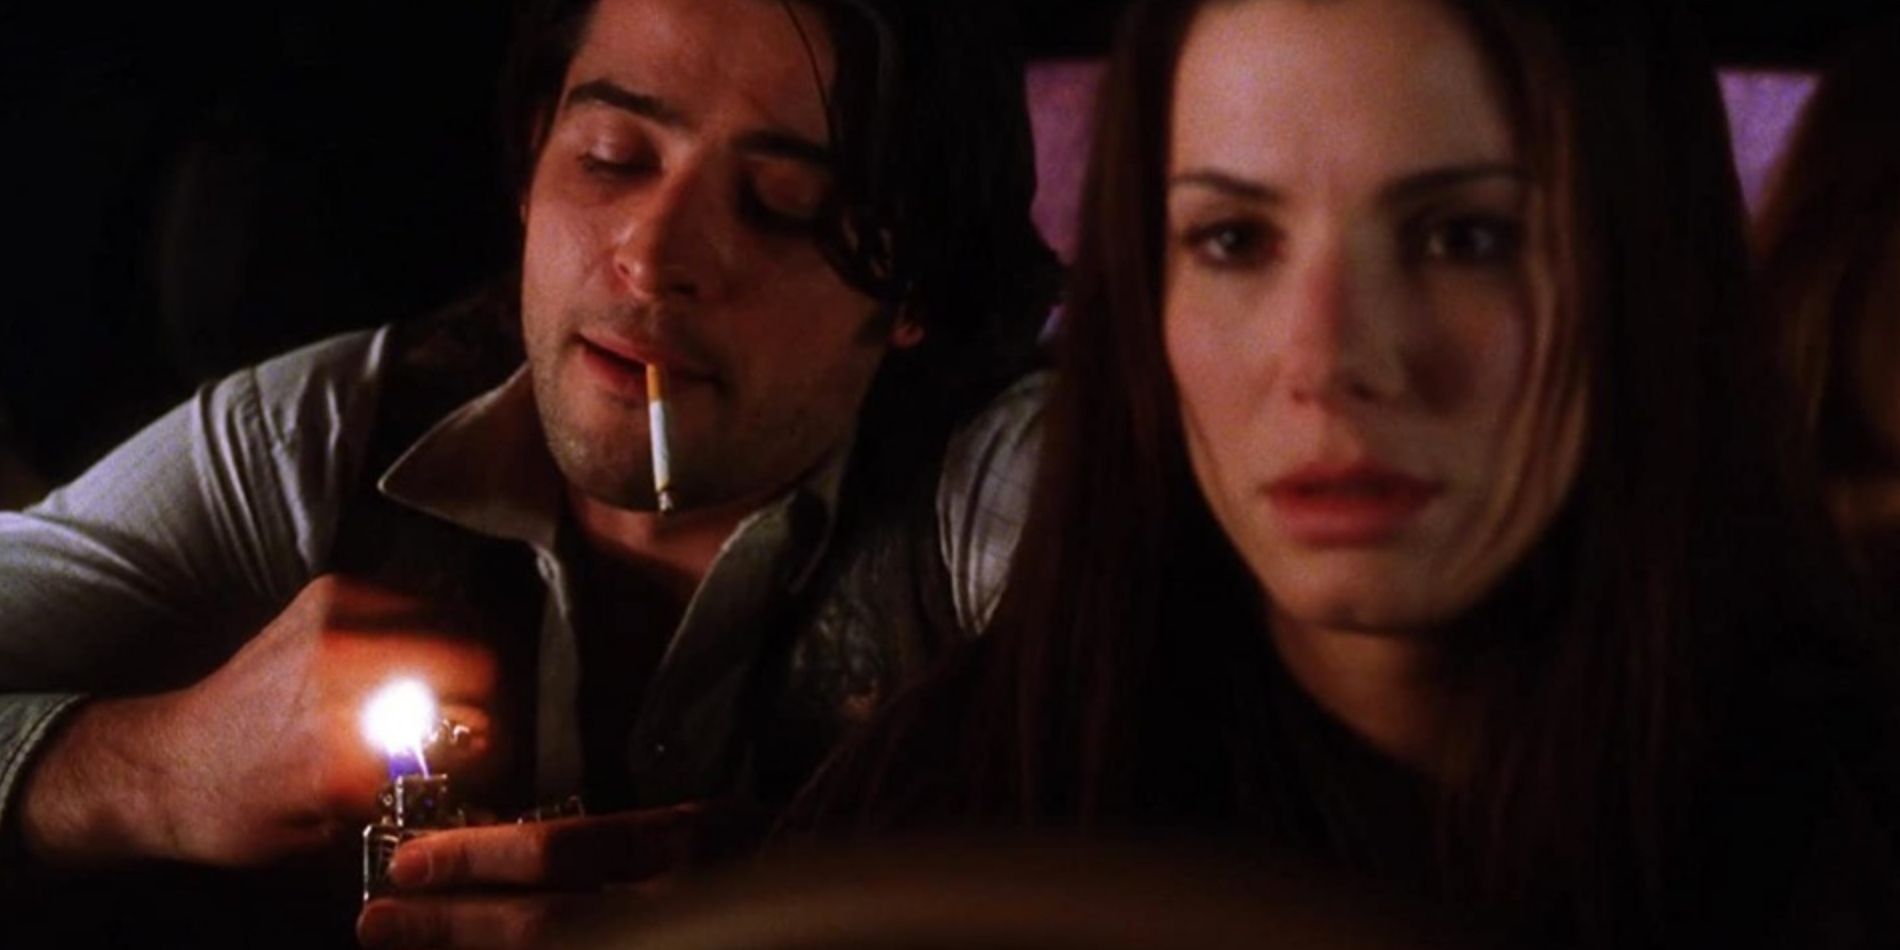 James sits behind Sally in the car in Practical Magic